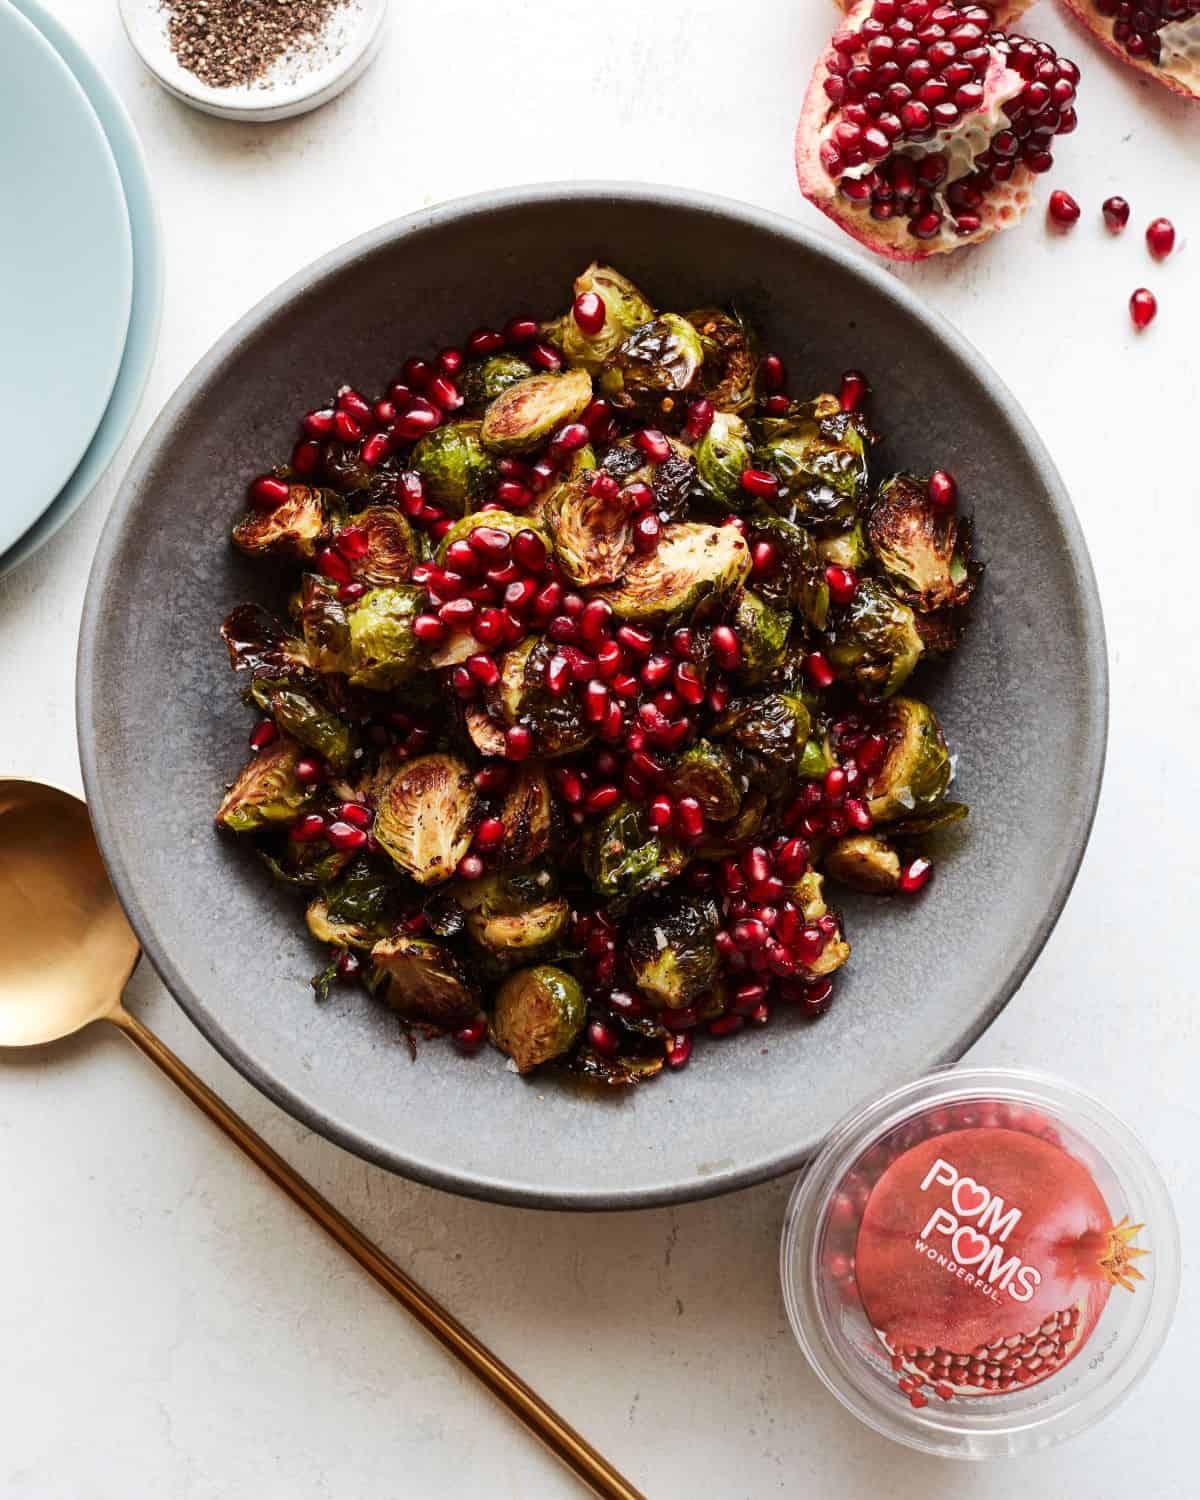 A grey shallow bowl with roasted brussels sprouts salad topped with pomegranate seeds, with a gold spoon on its side, pomegranate quarters, plates and a box of POM POMS full of pomegranate seeds next to it.